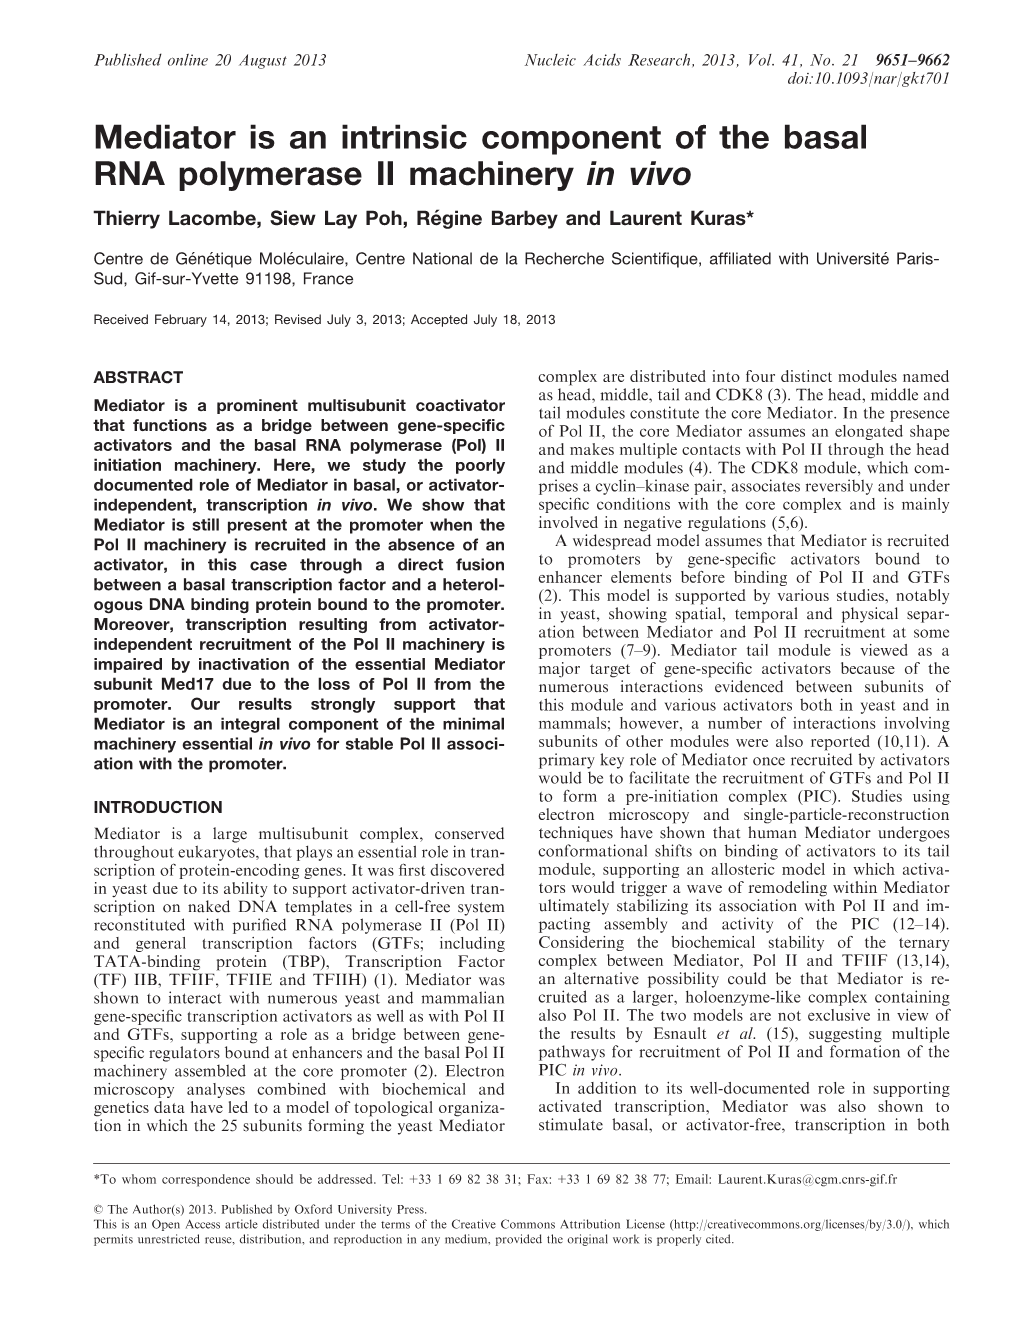 Mediator Is an Intrinsic Component of the Basal RNA Polymerase II Machinery in Vivo Thierry Lacombe, Siew Lay Poh, Re´ Gine Barbey and Laurent Kuras*